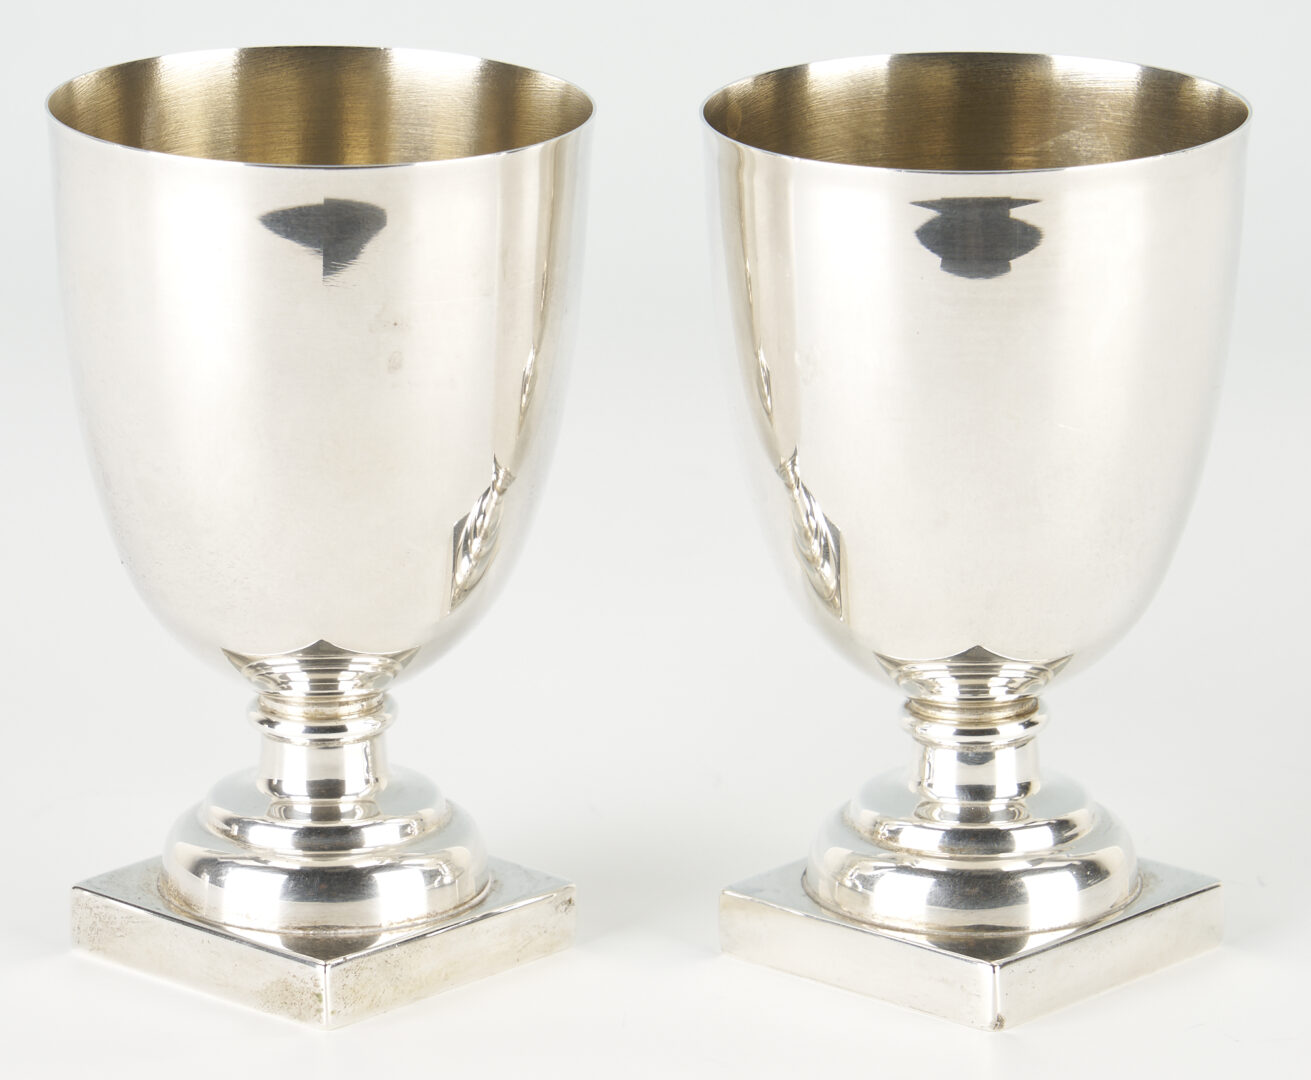 Lot 646: 4 Sterling Historic Reproduction cups incl. Thos. Jefferson, Paul Revere